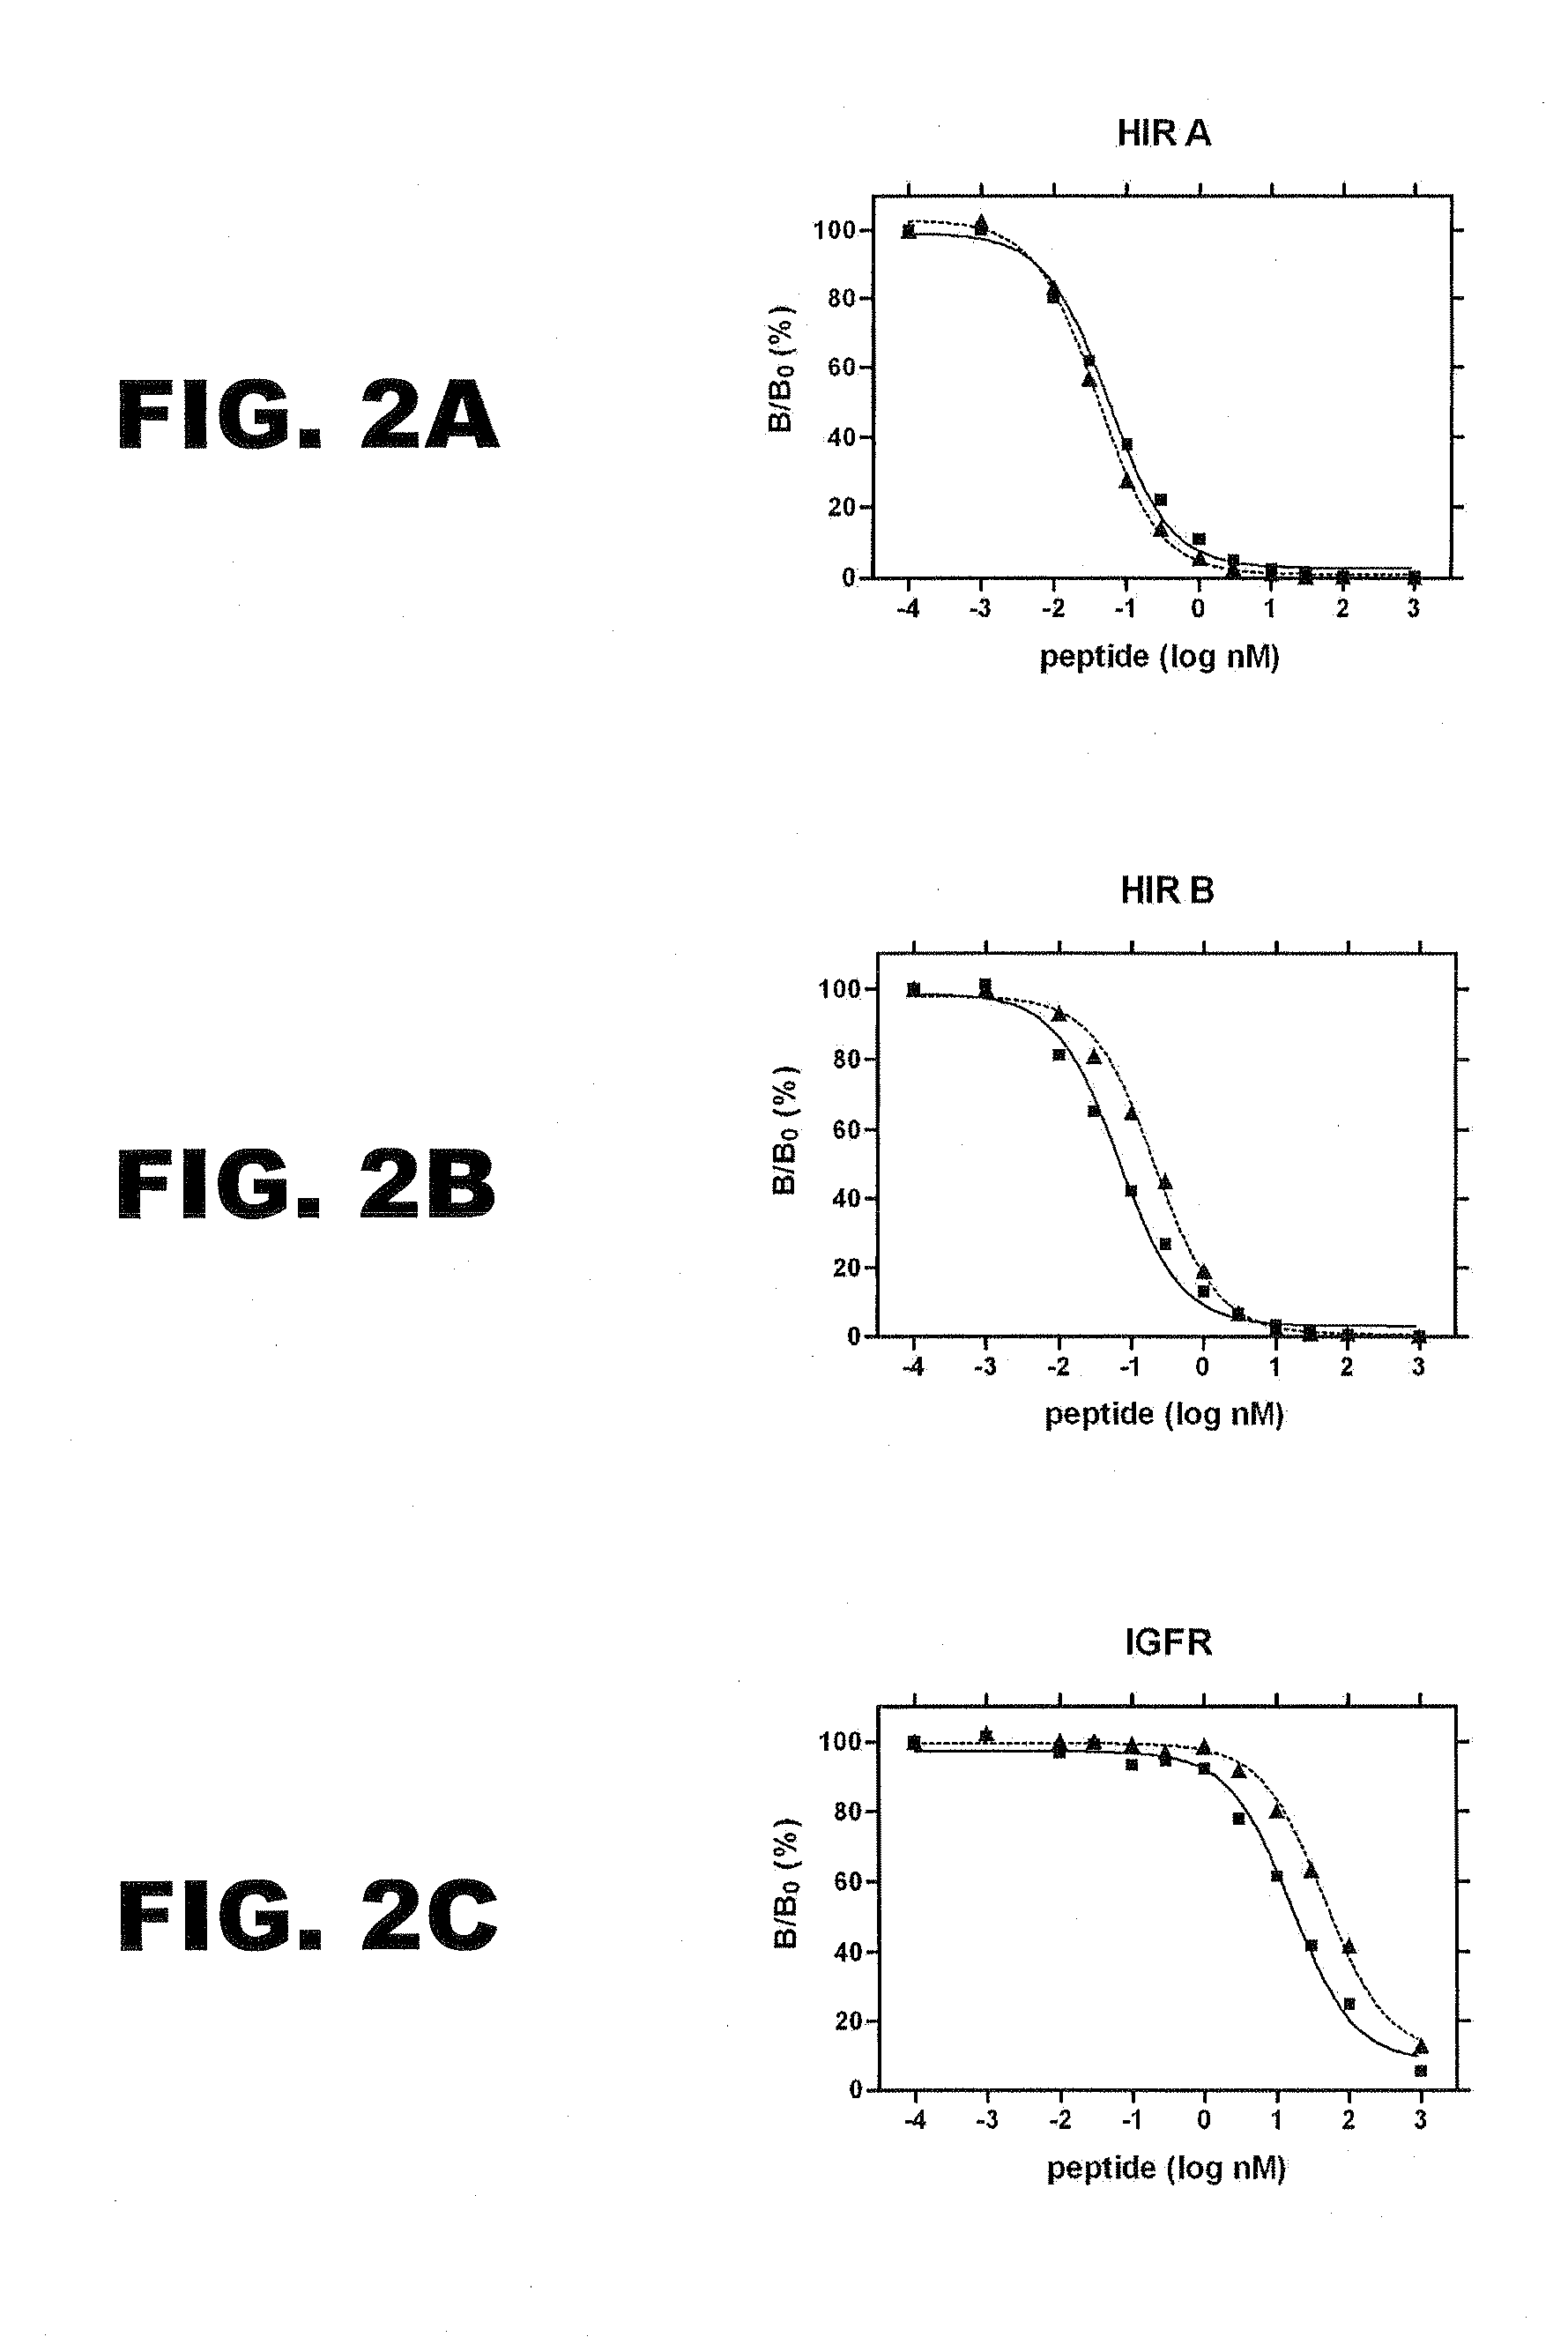 Isoform-specific insulin analogues